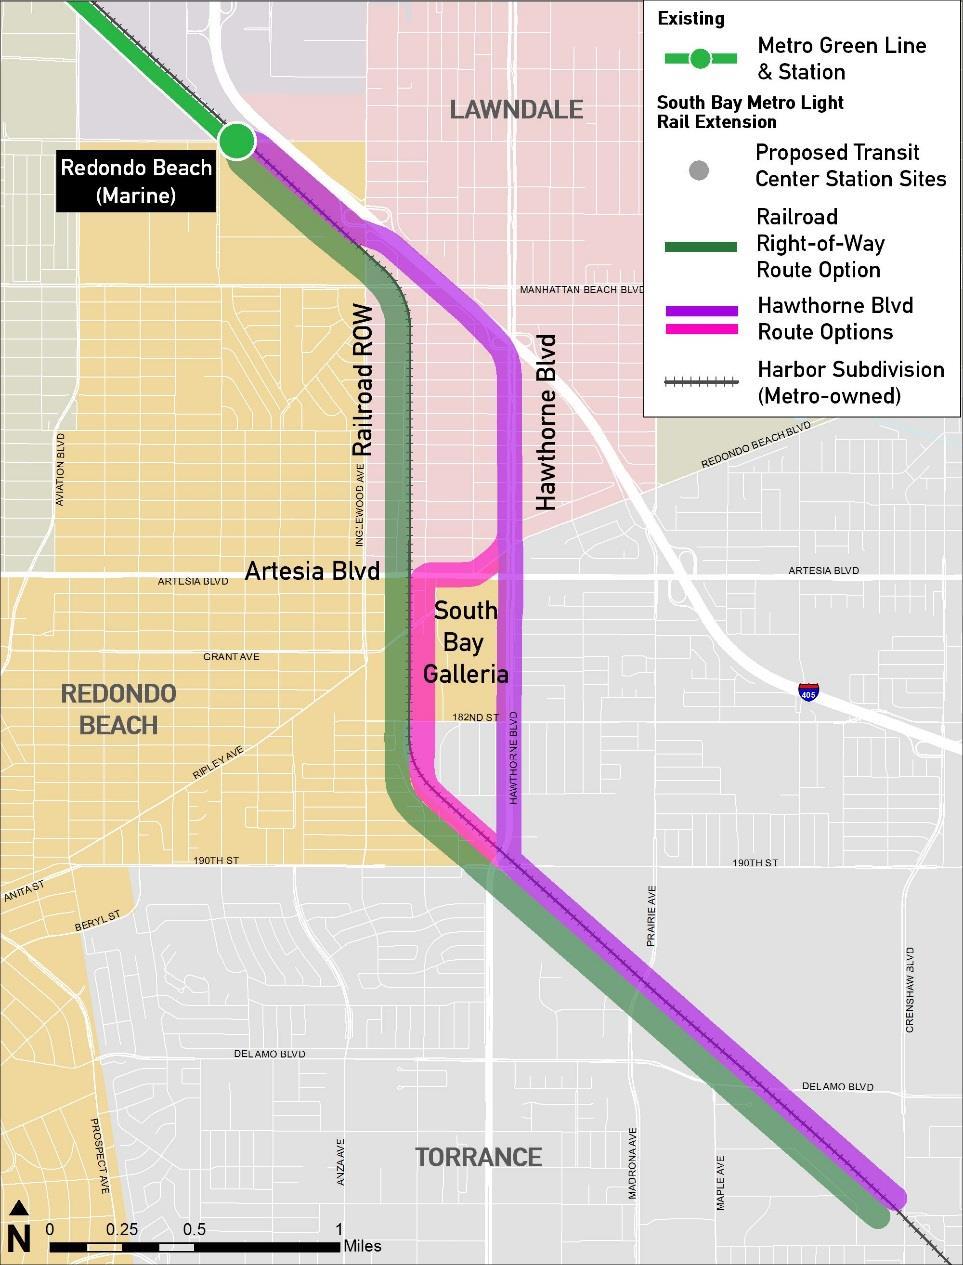 Route Alternatives 9 Based on initial city staff input, two main route alternatives under consideration: Route Options Under Consideration Alternative R: Within Railroad ROW with